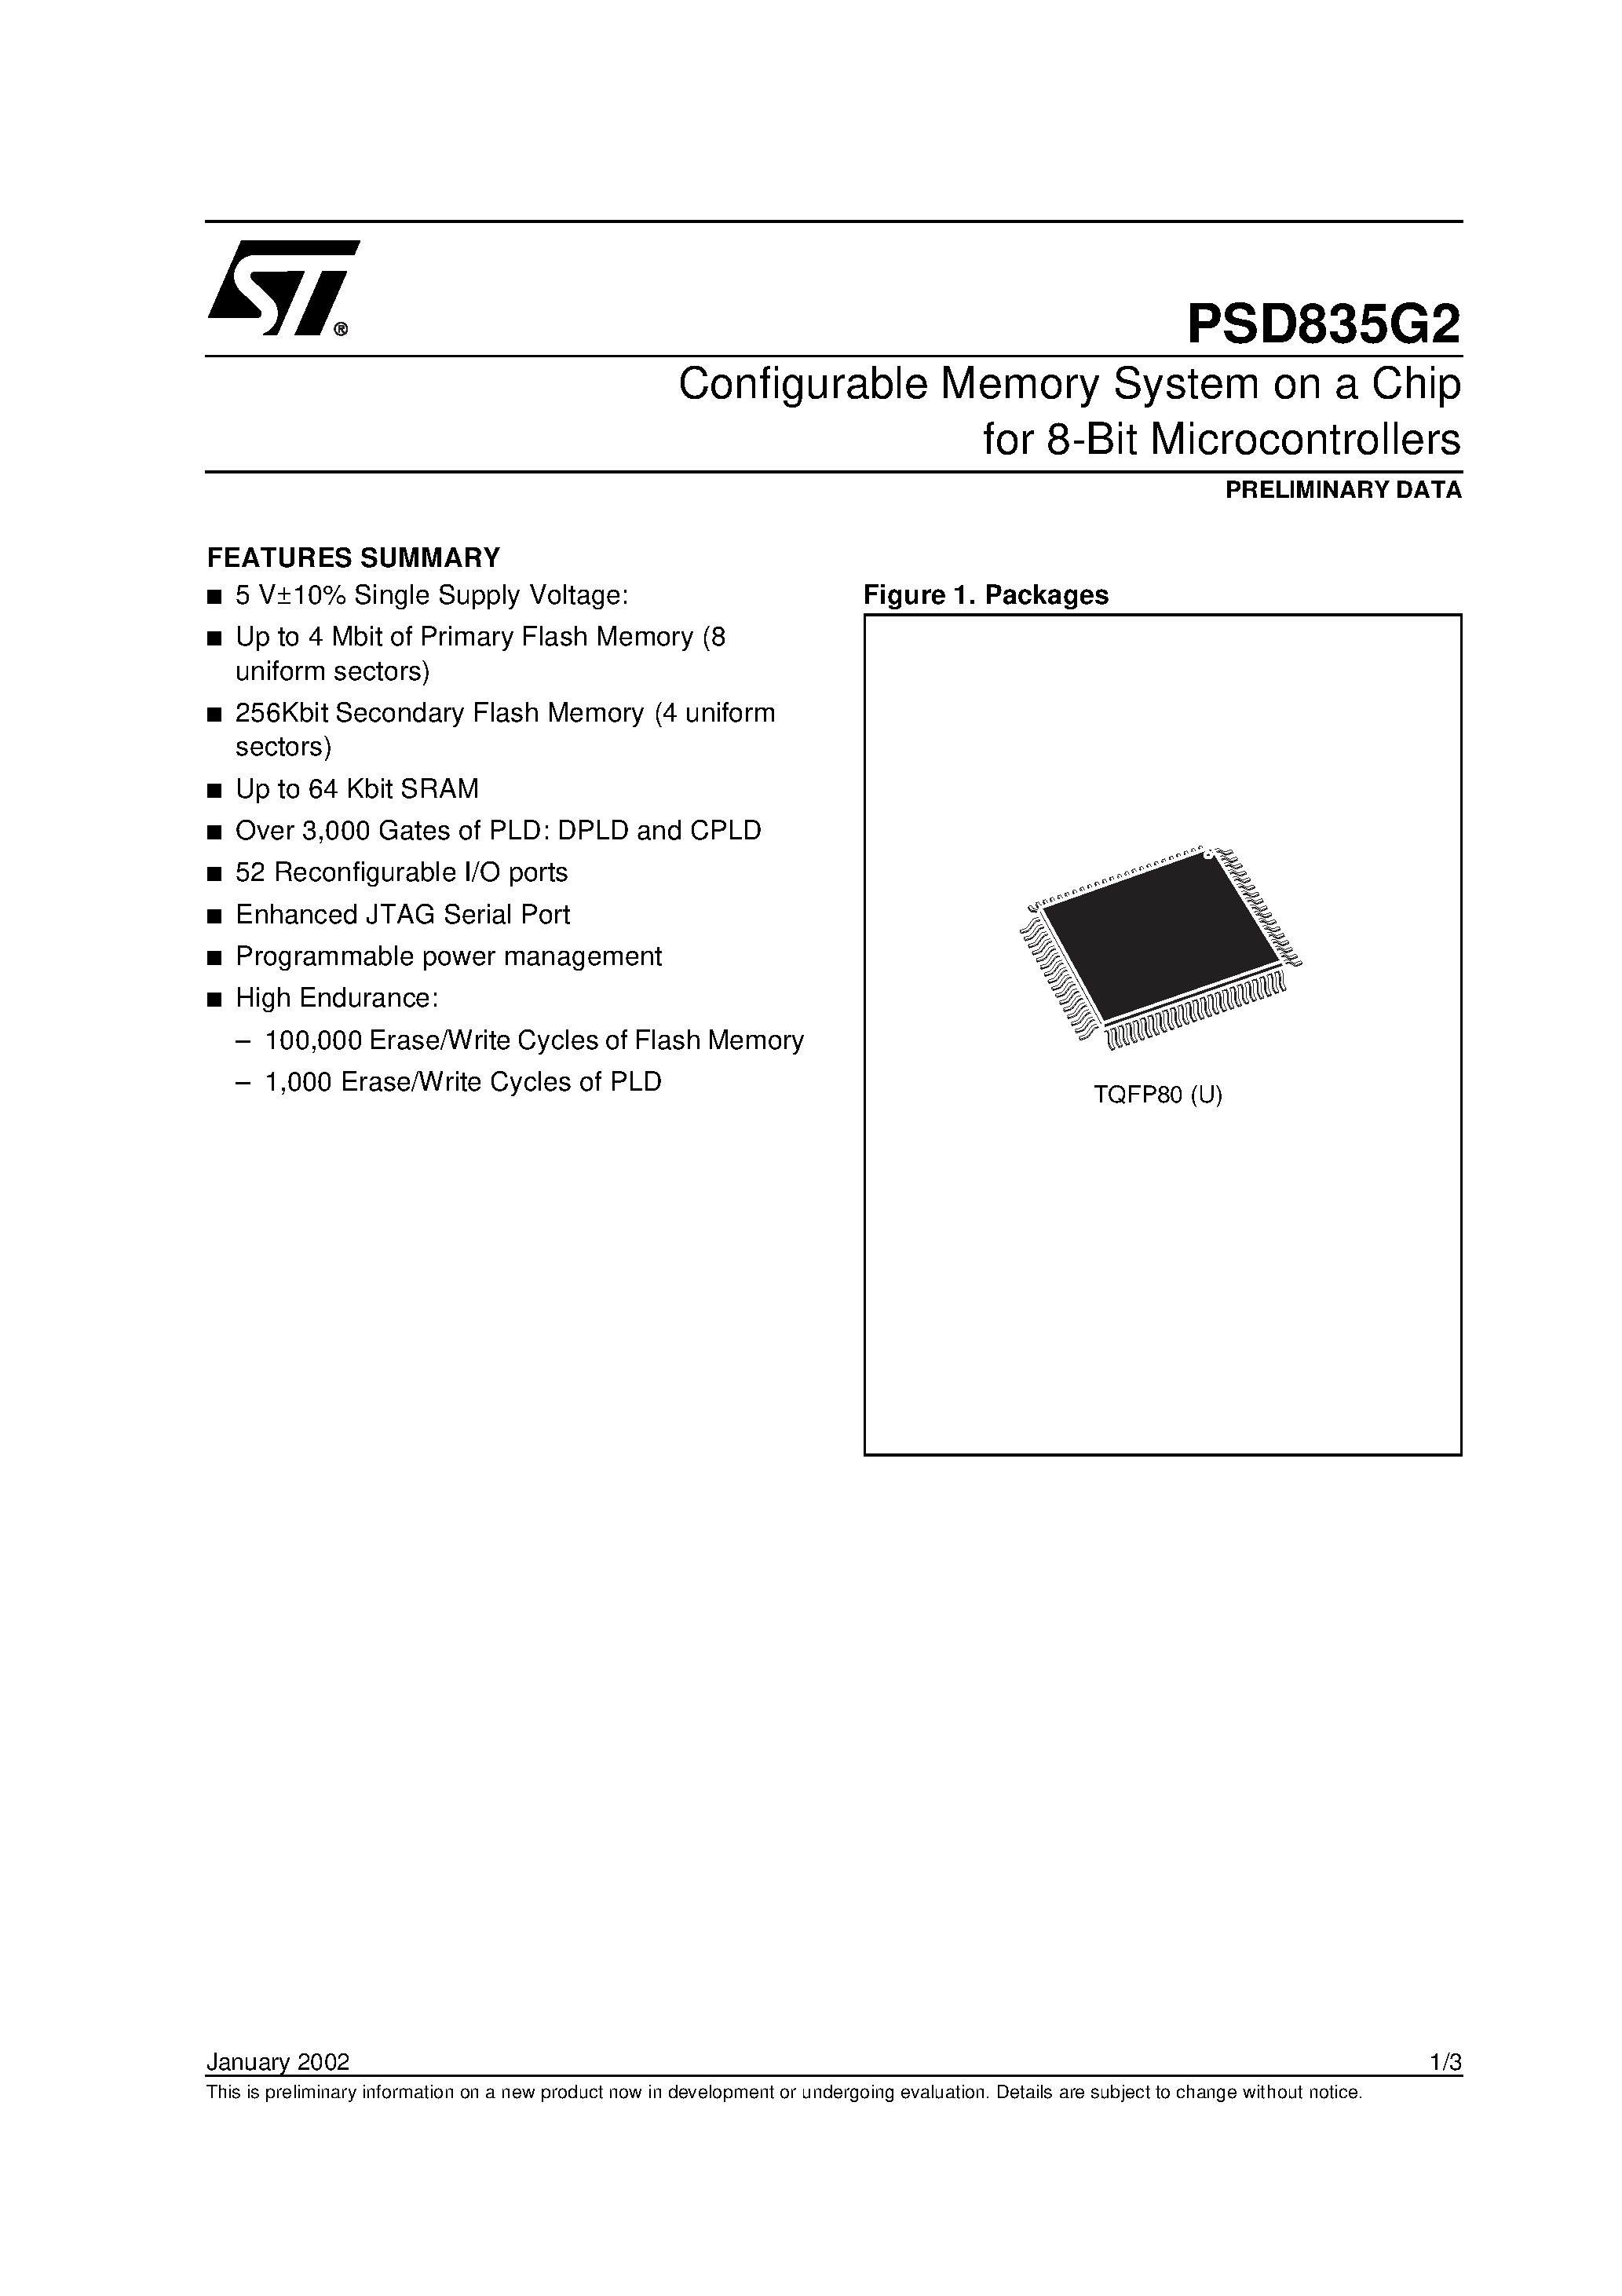 Datasheet PSD835F2-A-90U - Configurable Memory System on a Chip for 8-Bit Microcontrollers page 1